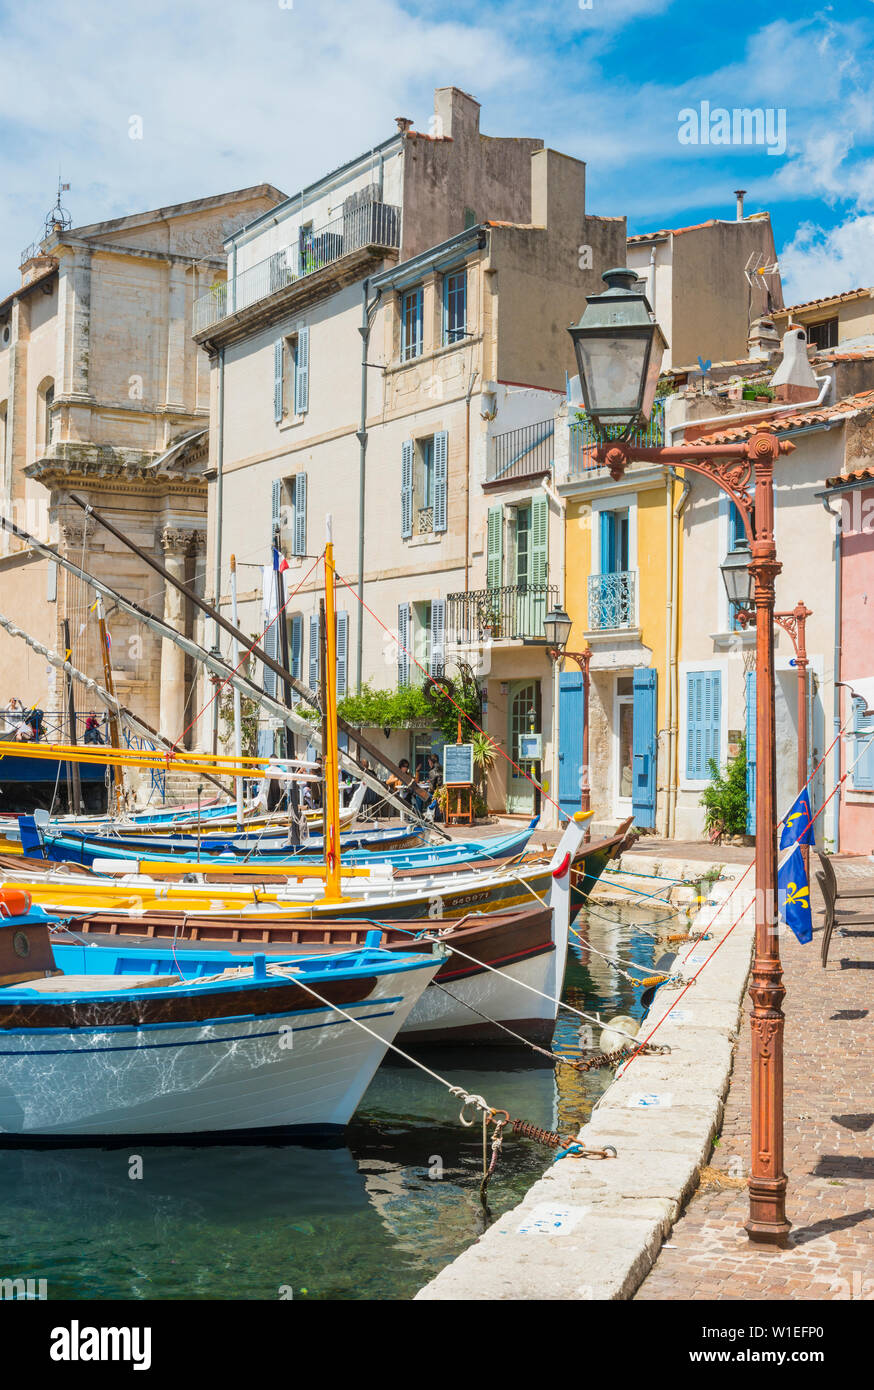 Boats in Martigues port, Bouches-du-Rhone, Provence, Provence-Alpes-Cote d'Azur, France, Europe Stock Photo